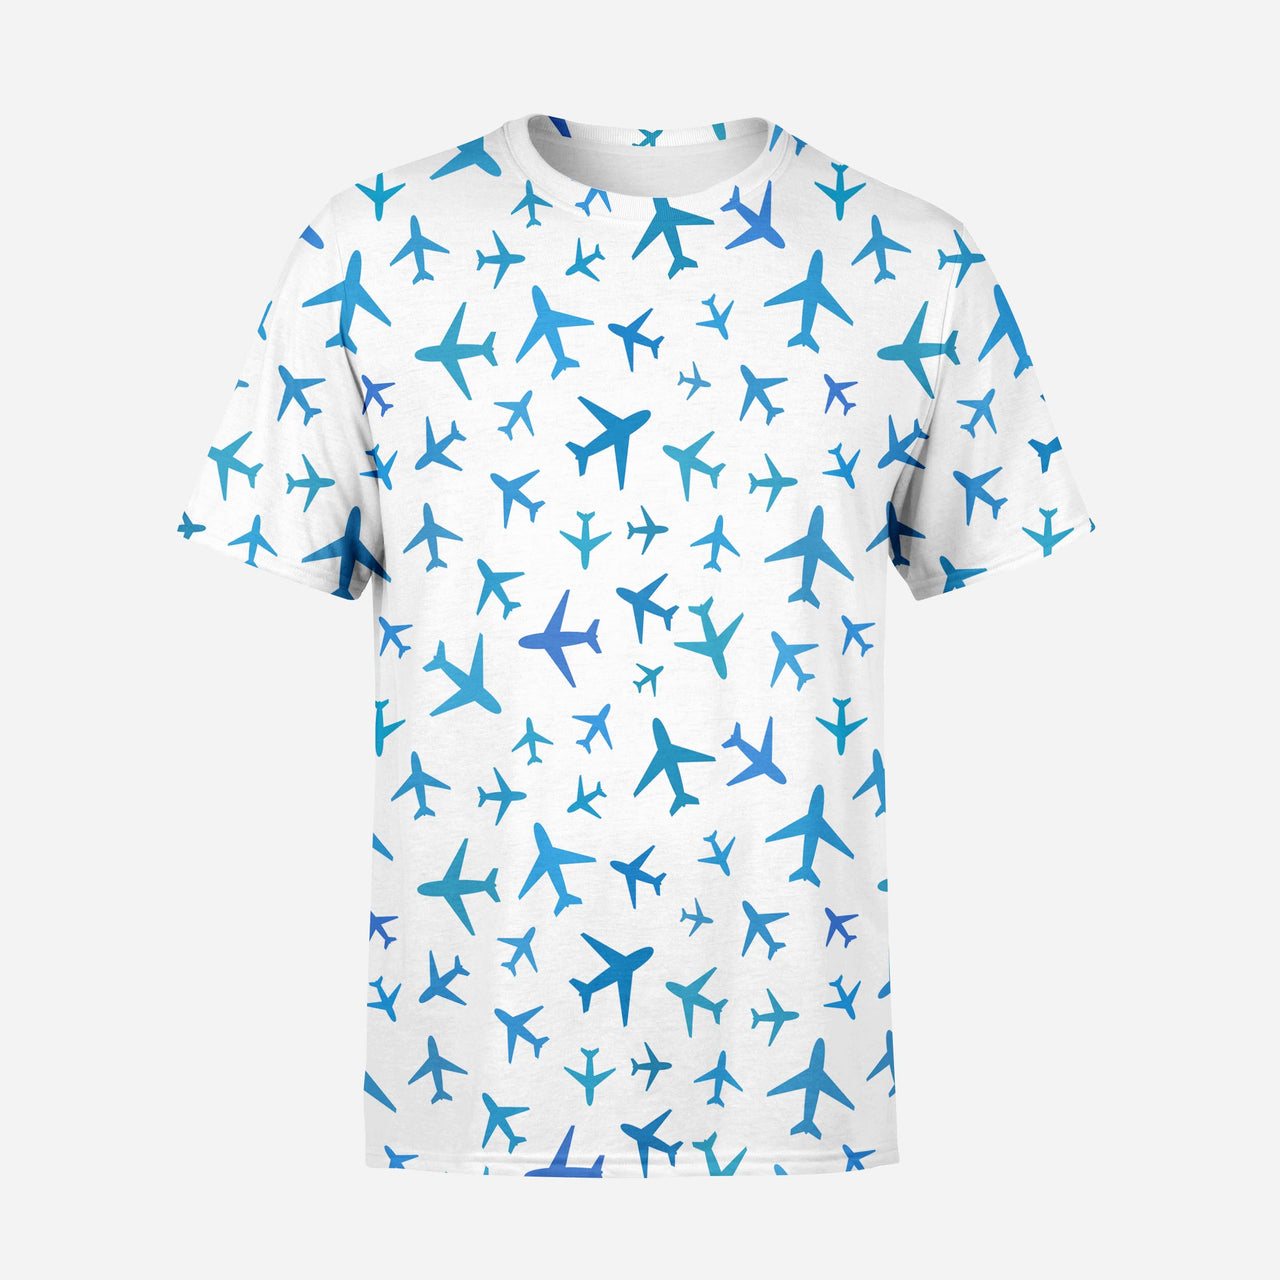 Many Airplanes Printed 3D T-Shirts